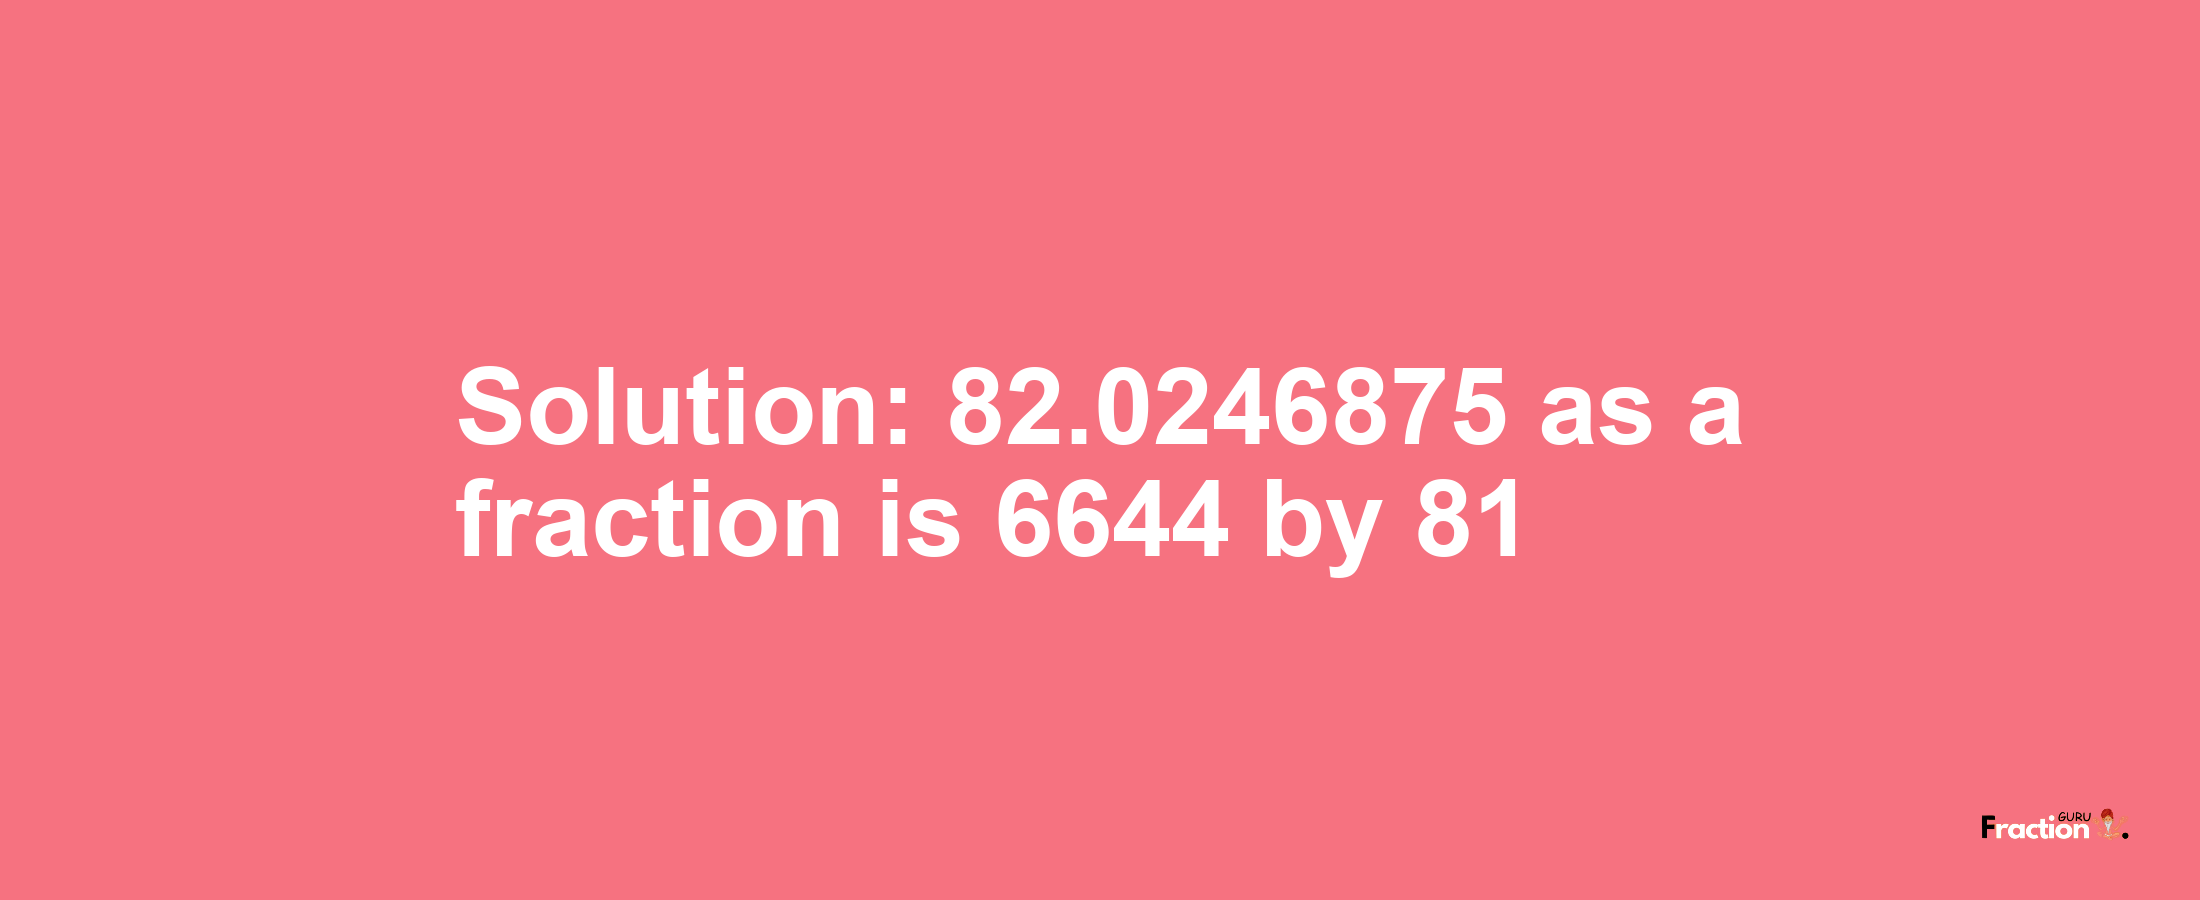 Solution:82.0246875 as a fraction is 6644/81